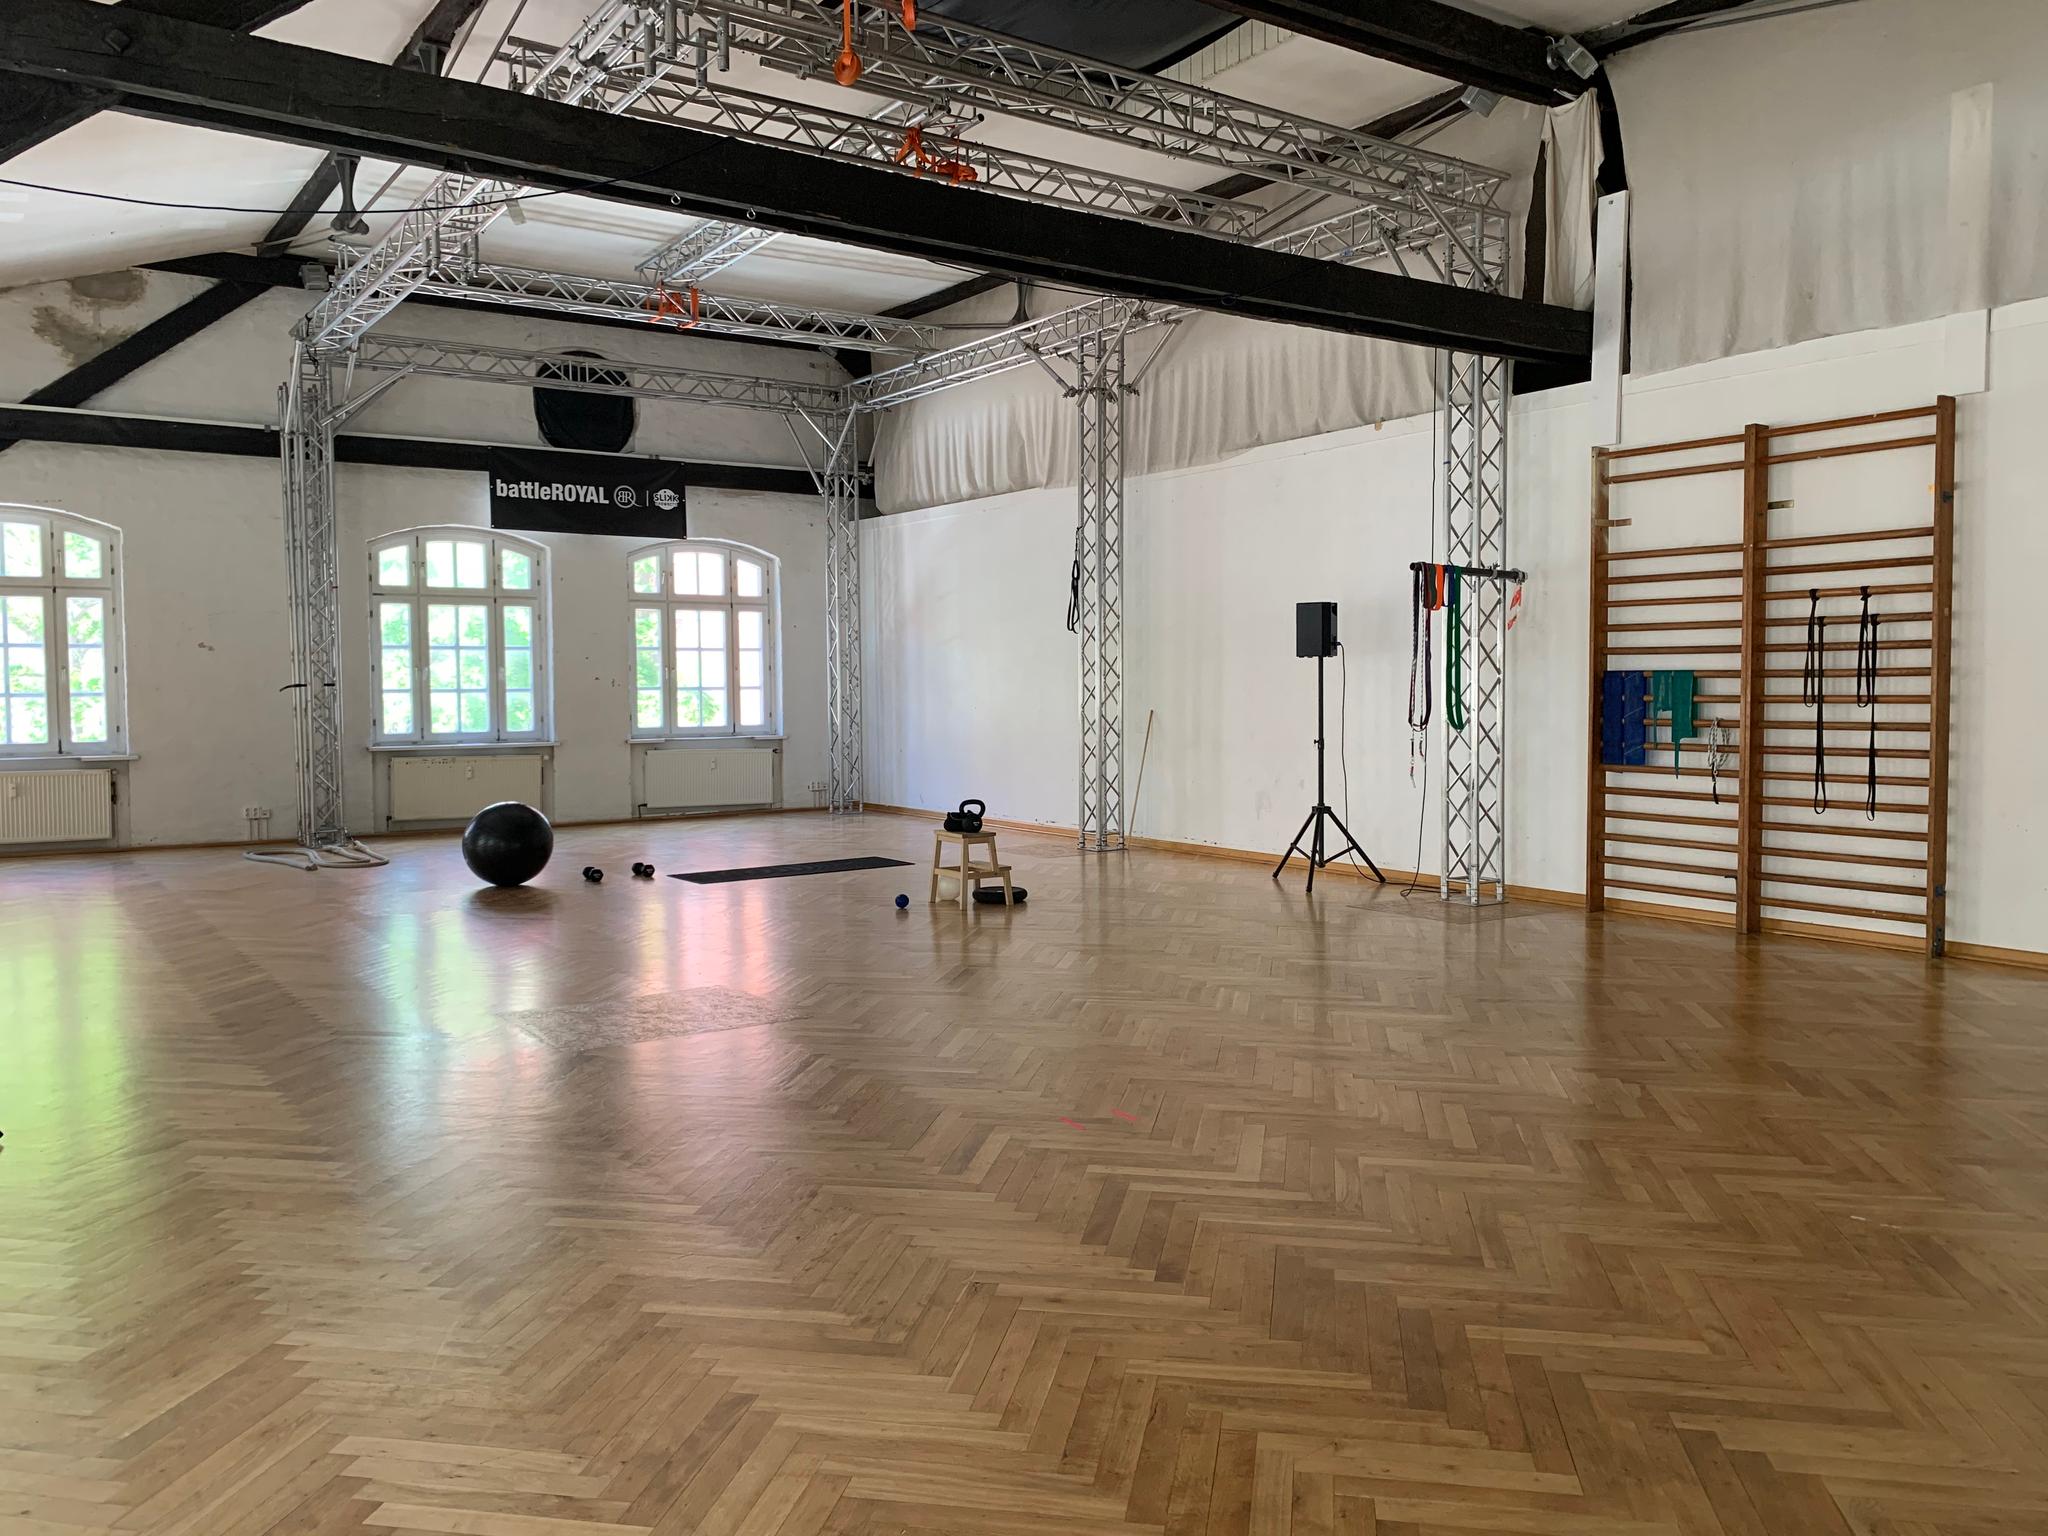 Wide shot of the studio space with yoga equipment on the floor.